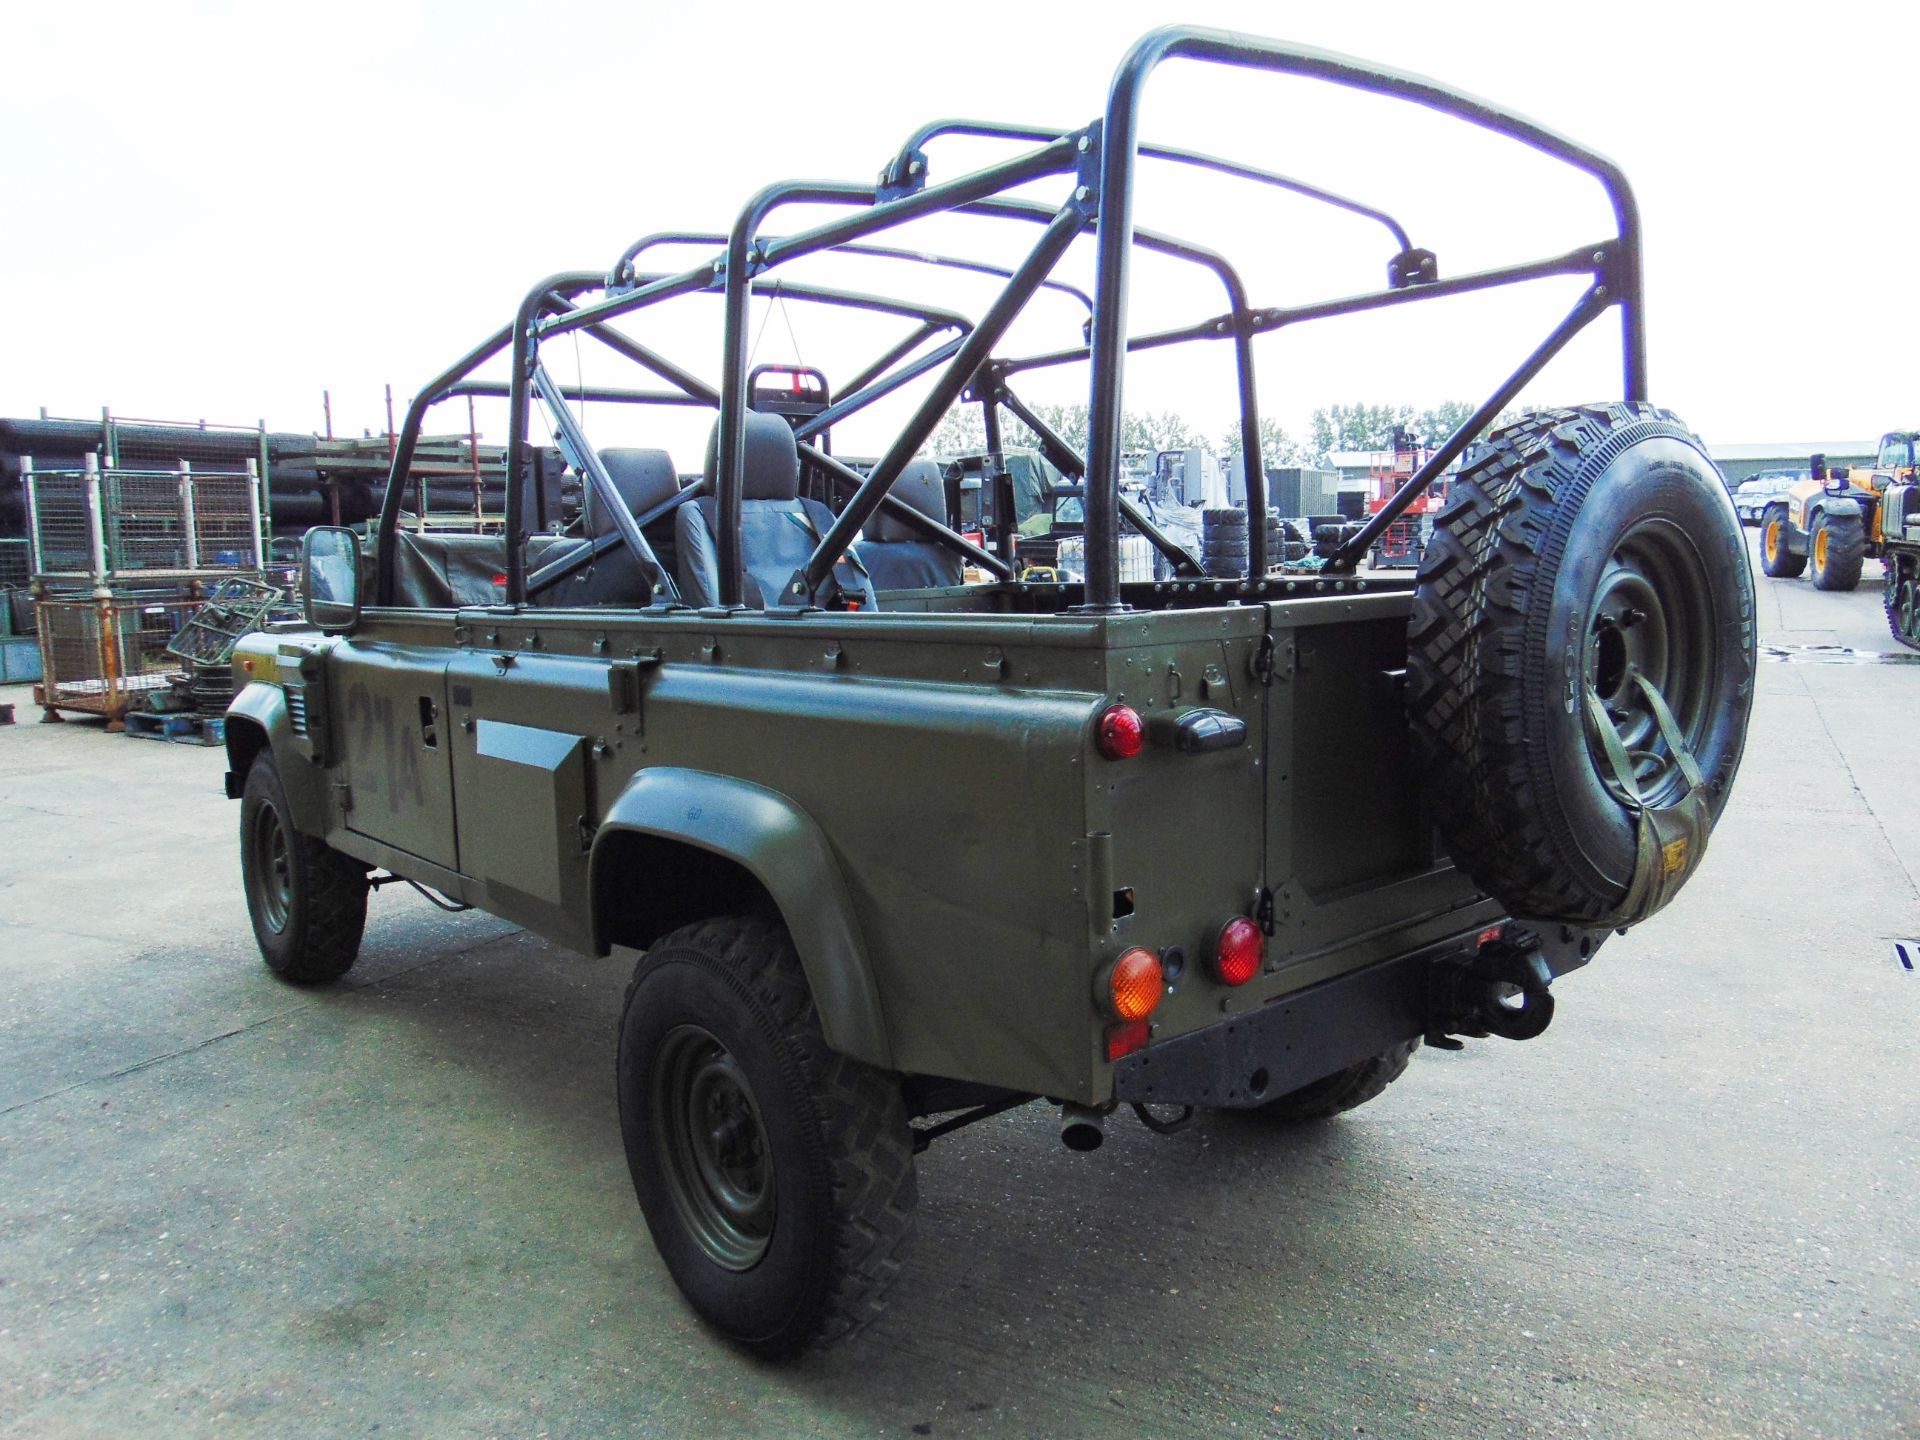 Land Rover Defender Wolf 110 Scout vehicle 300 Tdi - Image 7 of 37